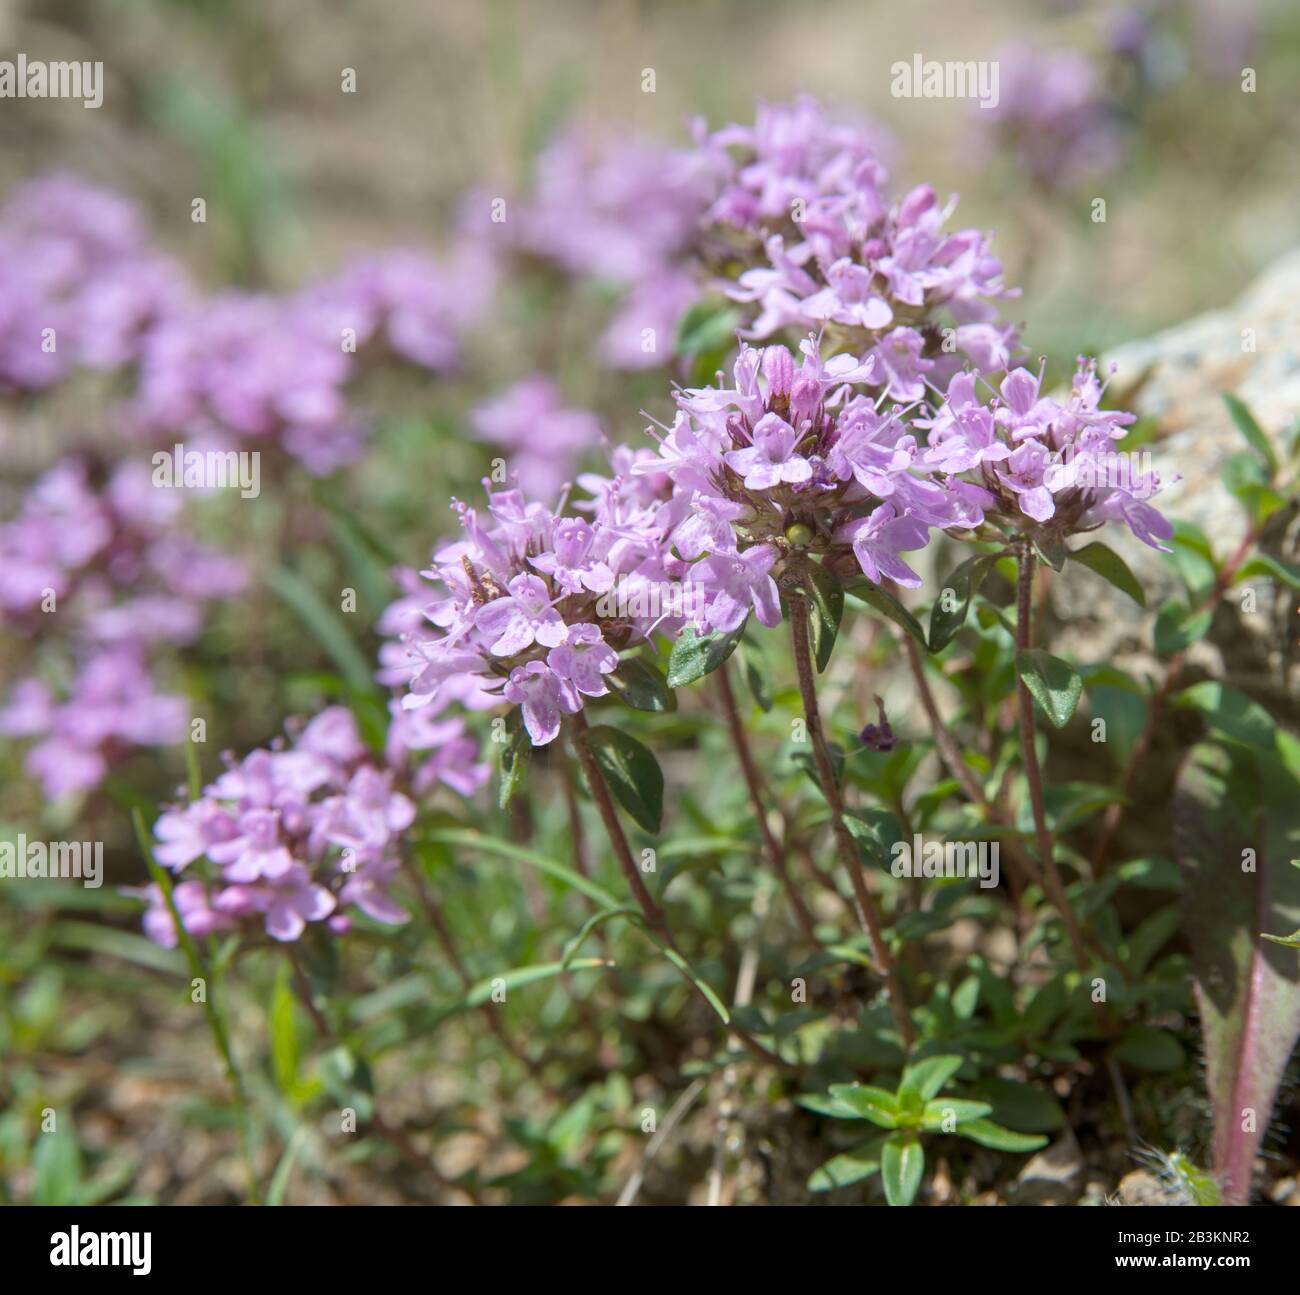 These flowers are thyme. Thyme is any of several species of culinary and medicinal herbs of the genus Thymus, most commonly Thymus vulgaris. Stock Photo